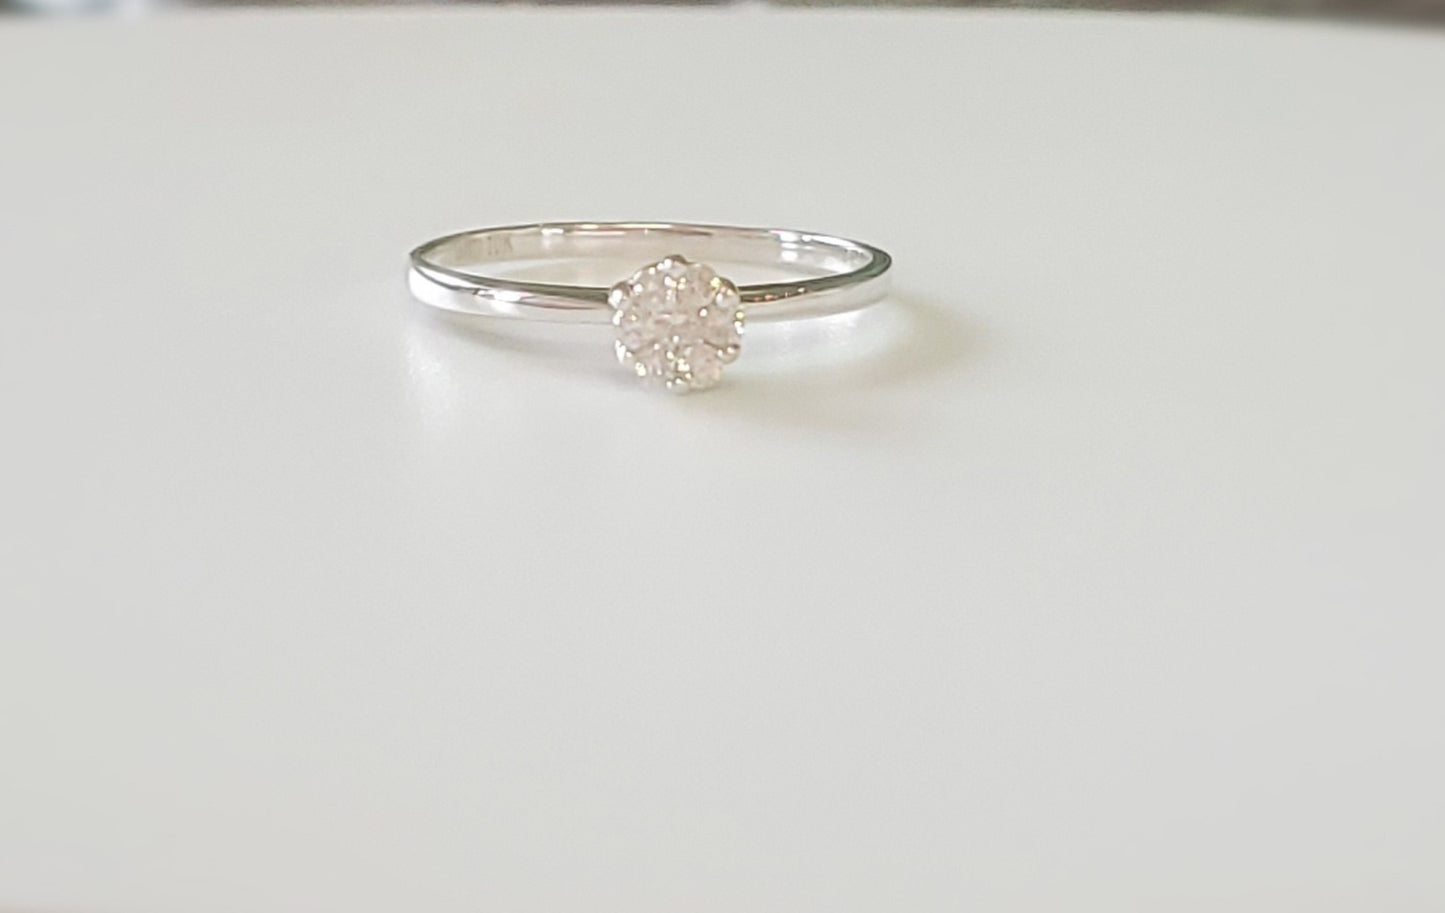 10K White Gold Ring Band with Diamond Cluster